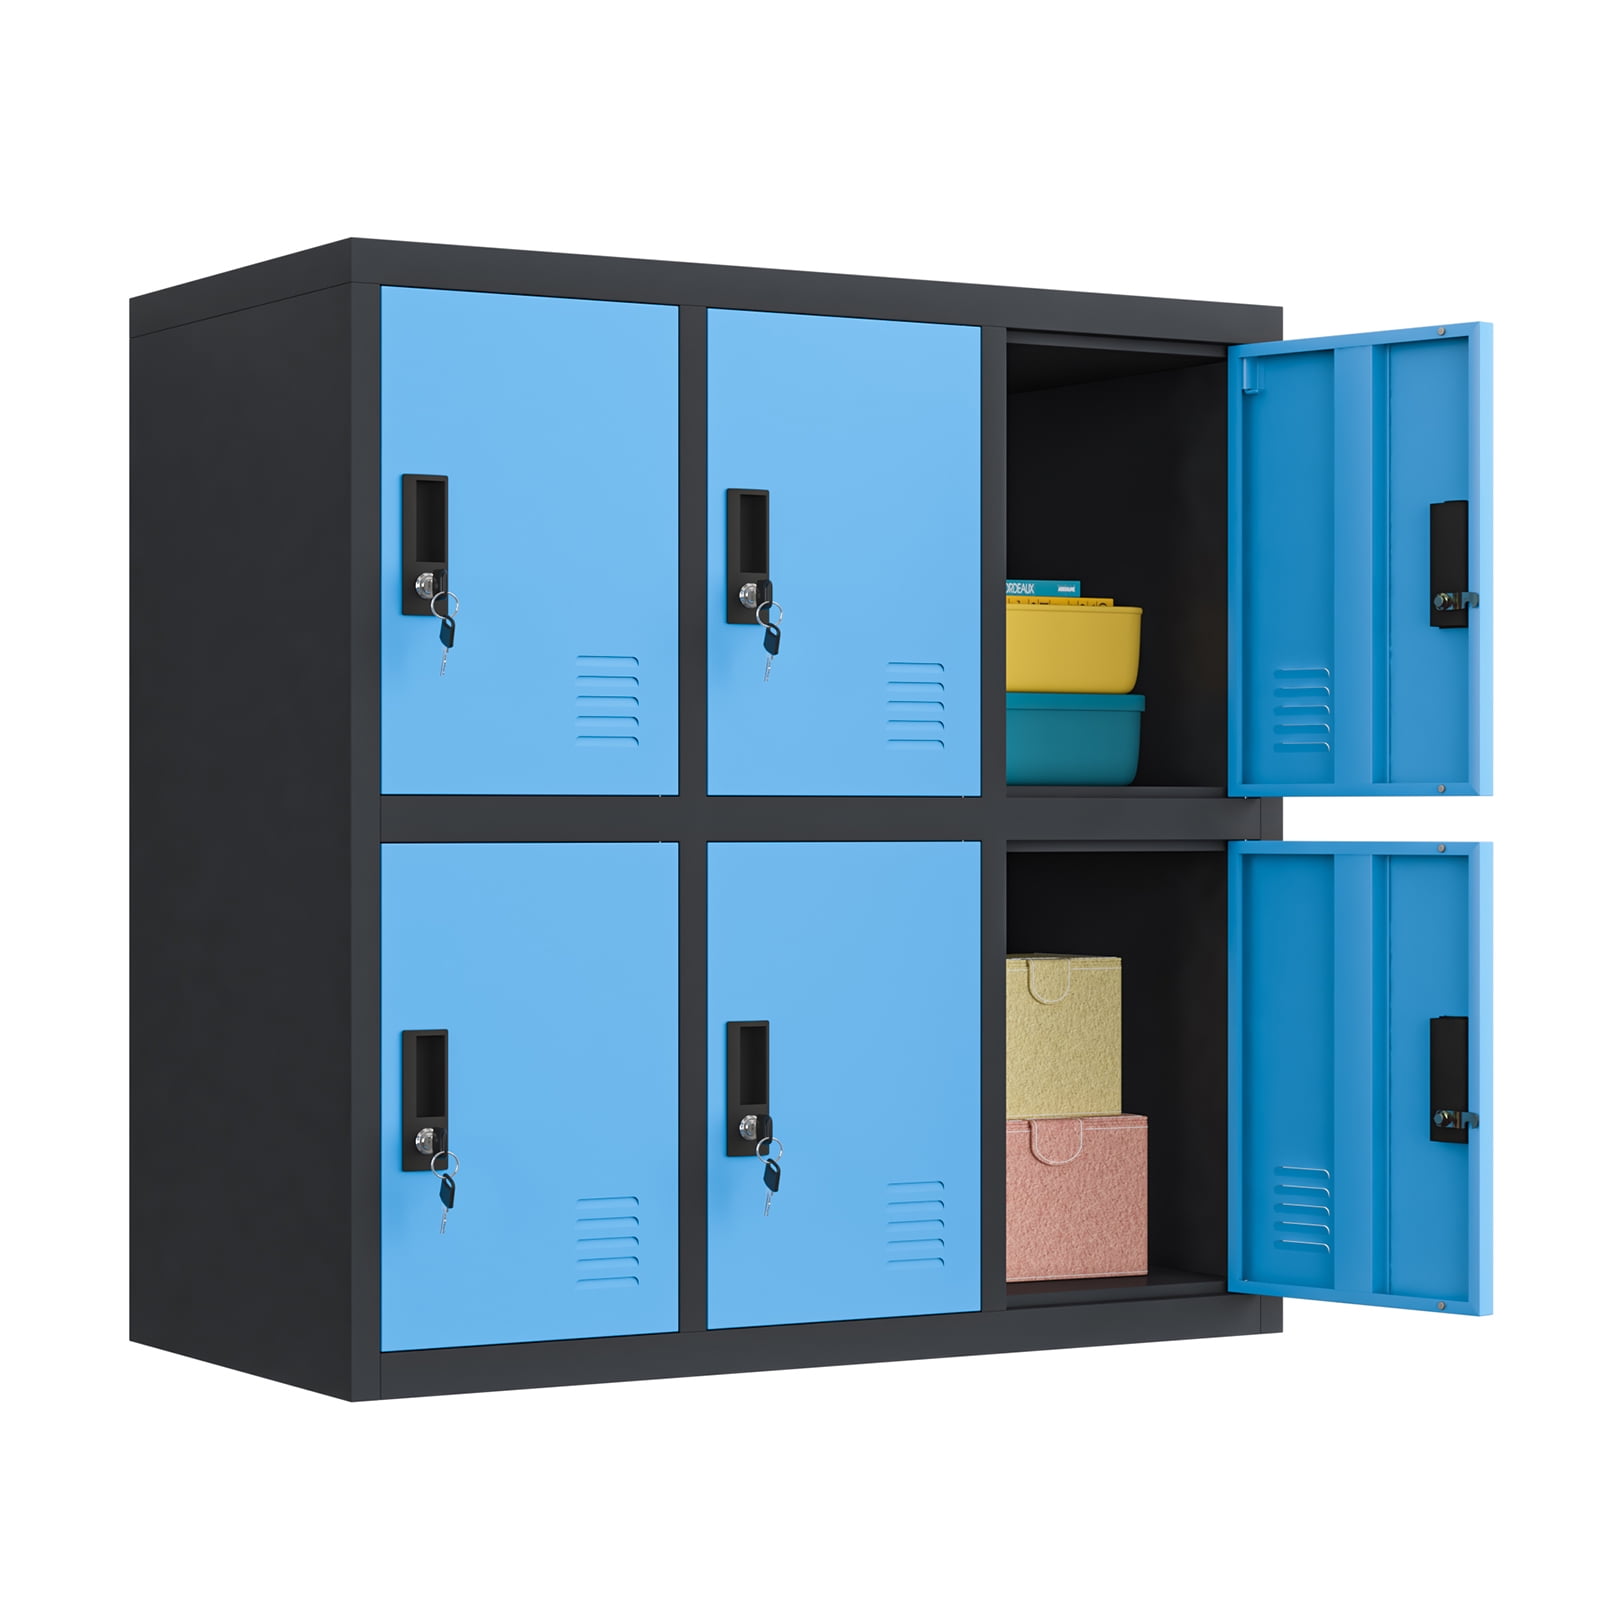 MECOLOR school and Home Locker Organizer Storage for Kids